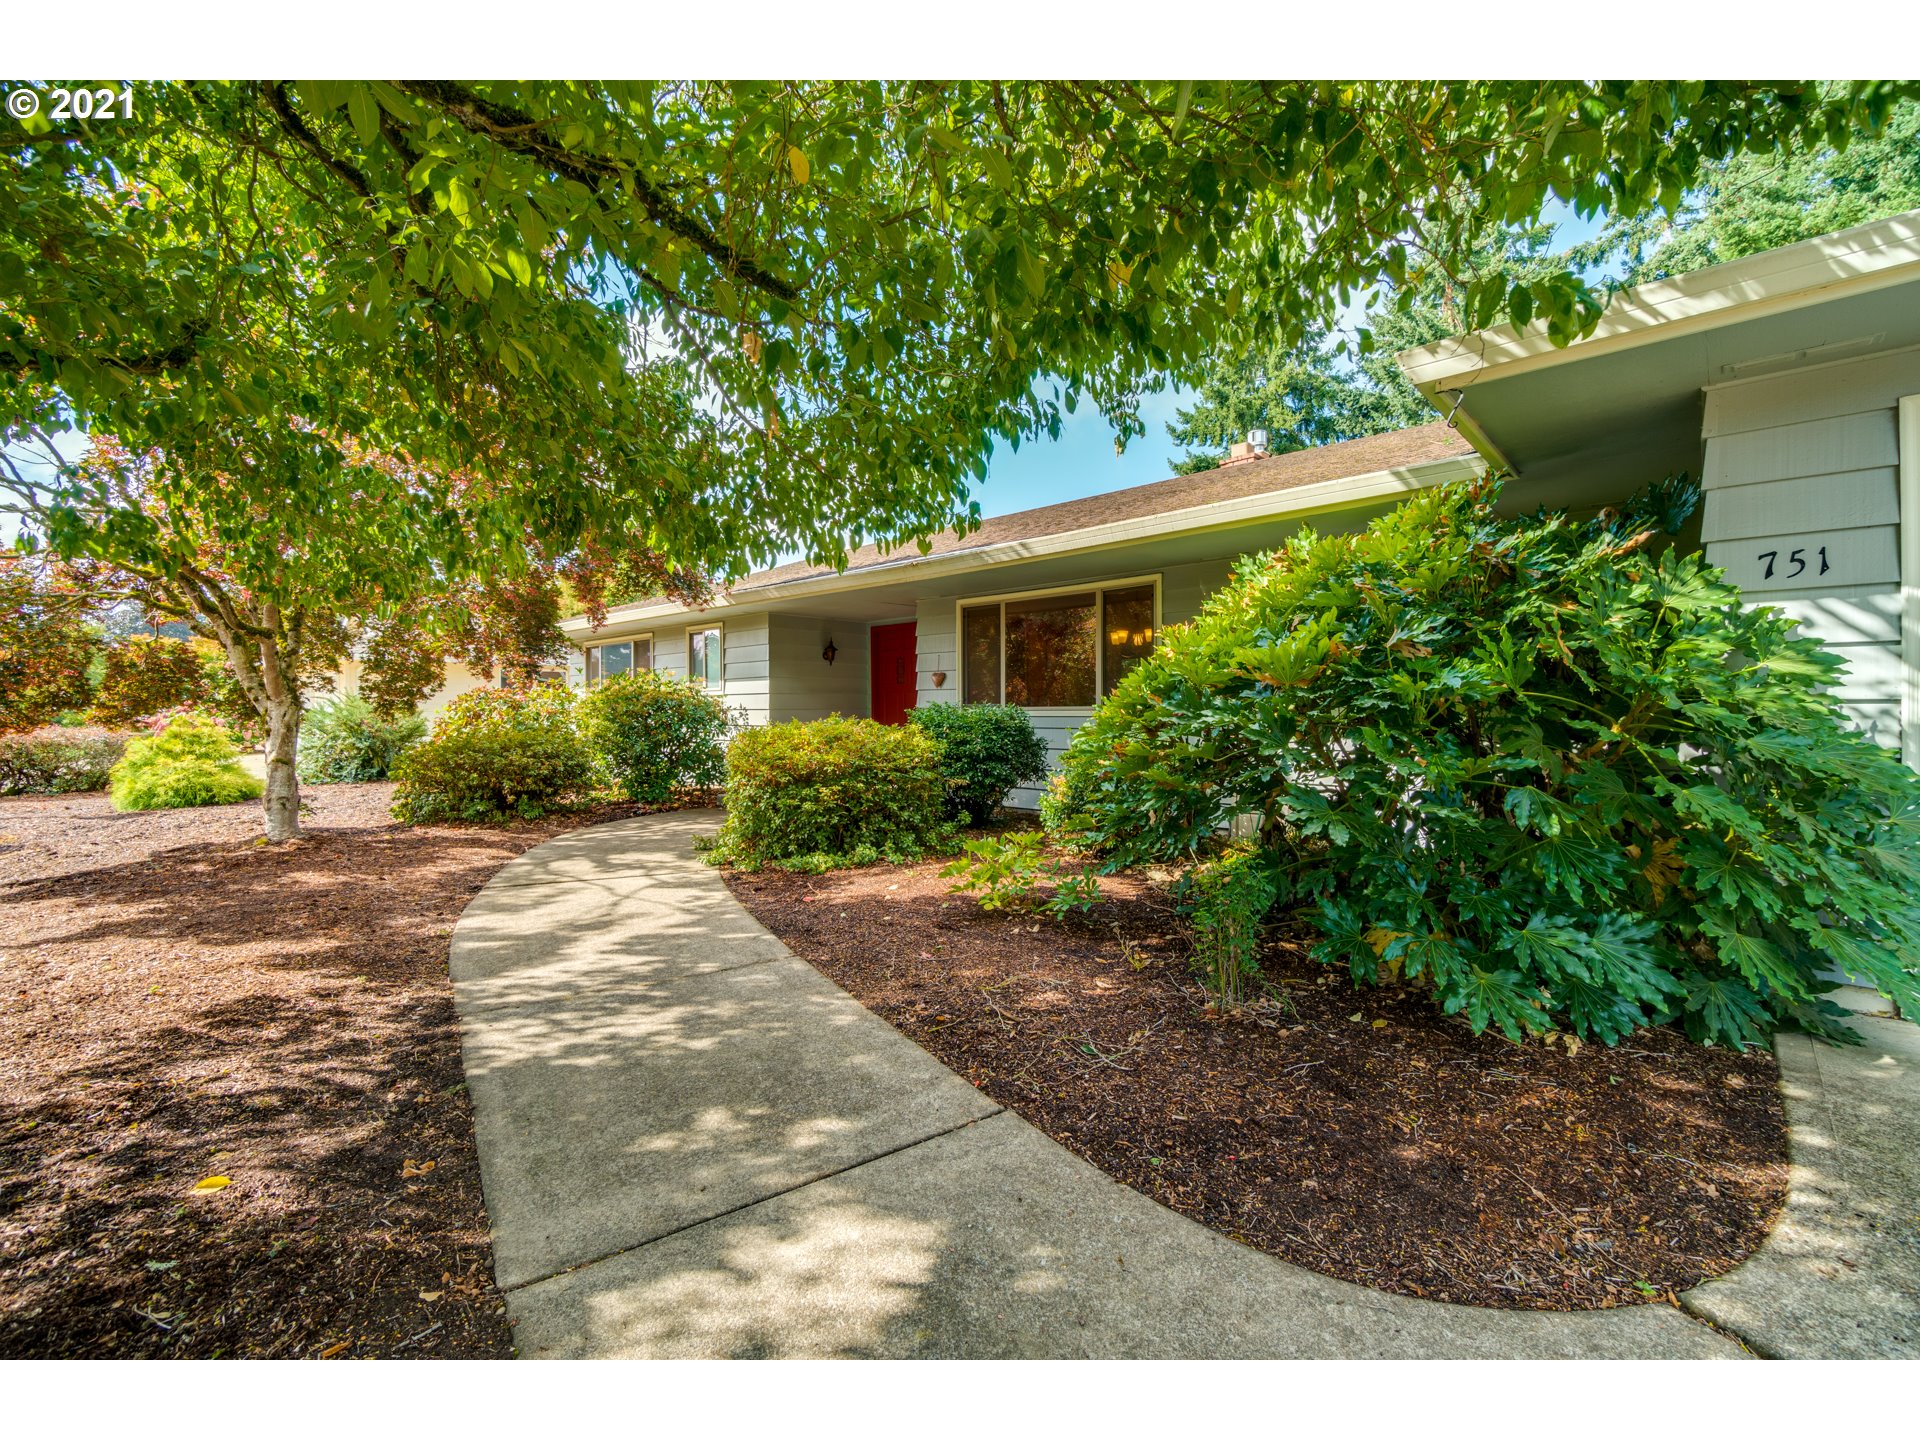 751 NW BAKER DR (1 of 32)